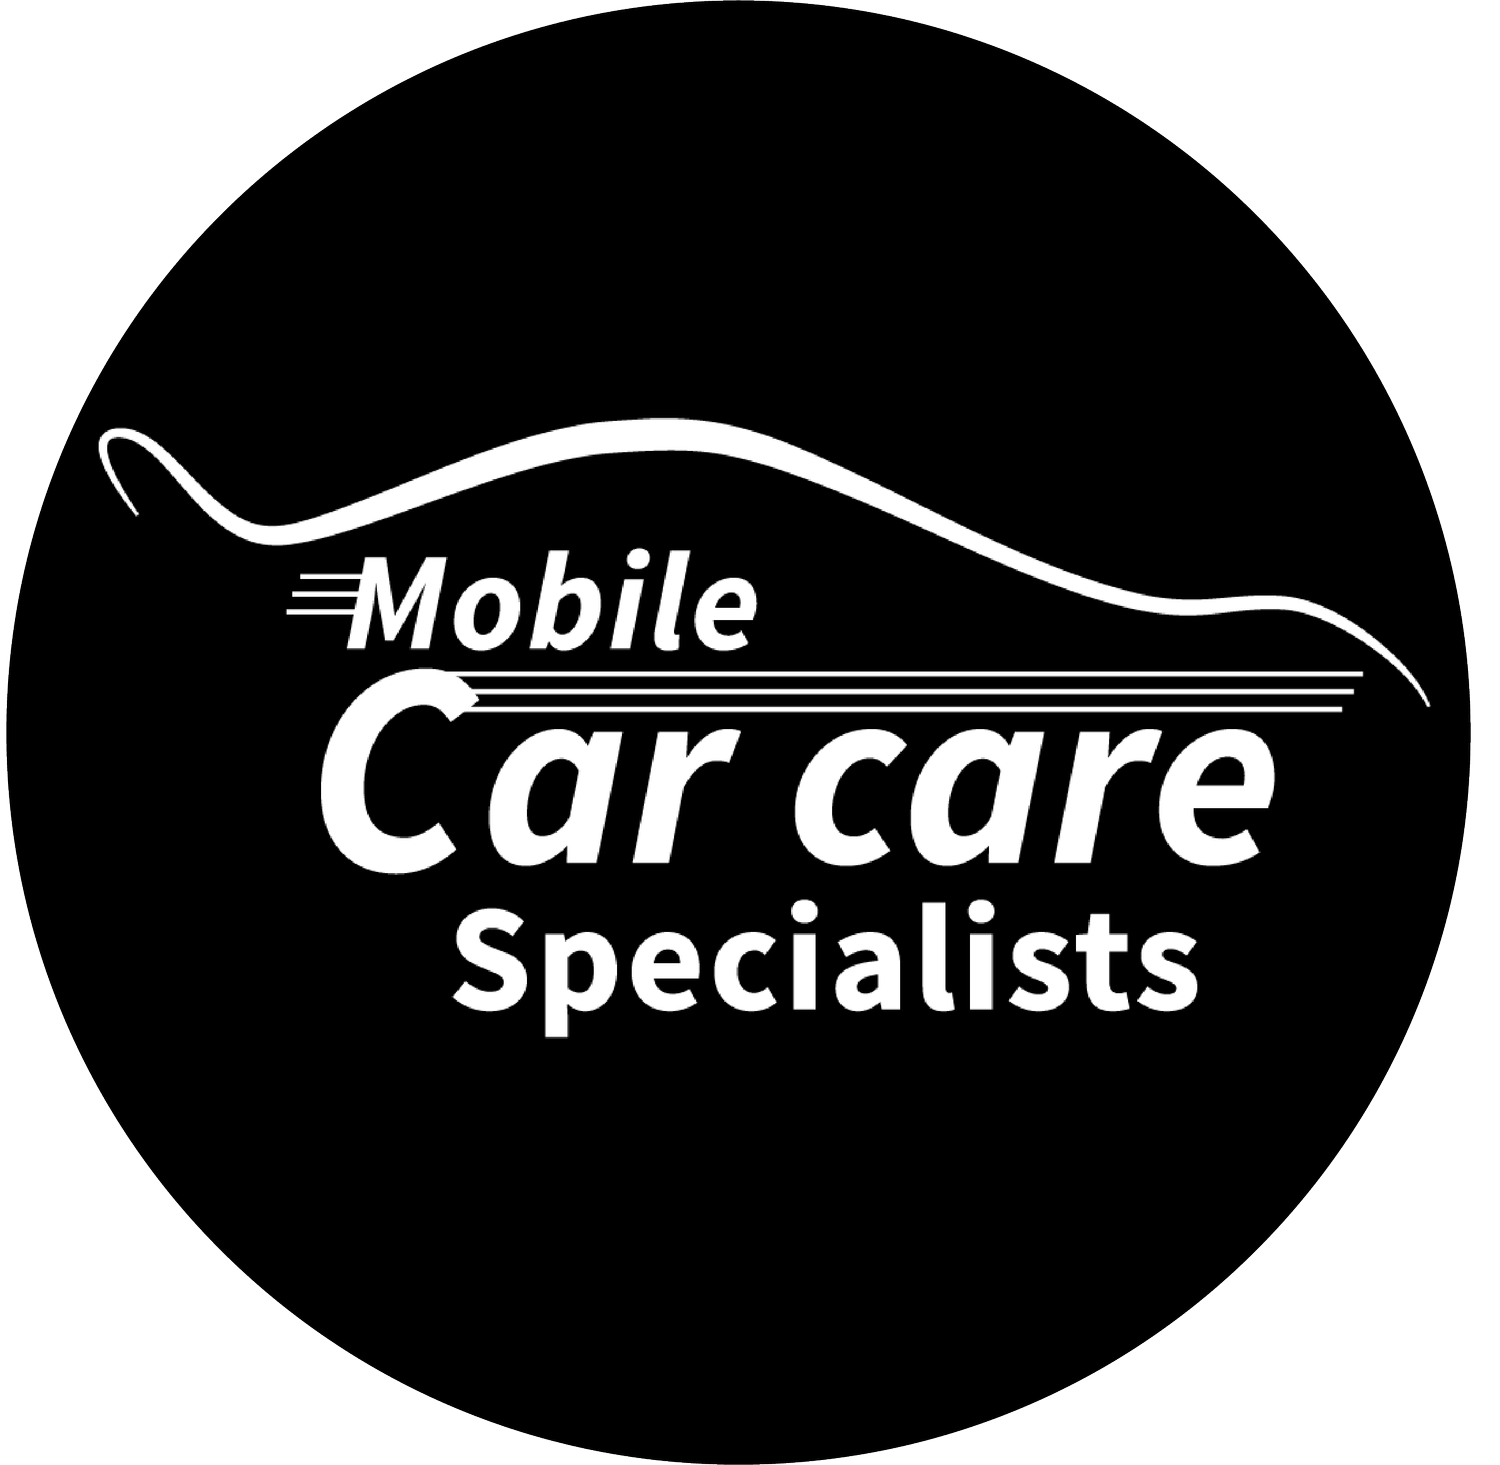 Mobile Car Cleaning Specialist